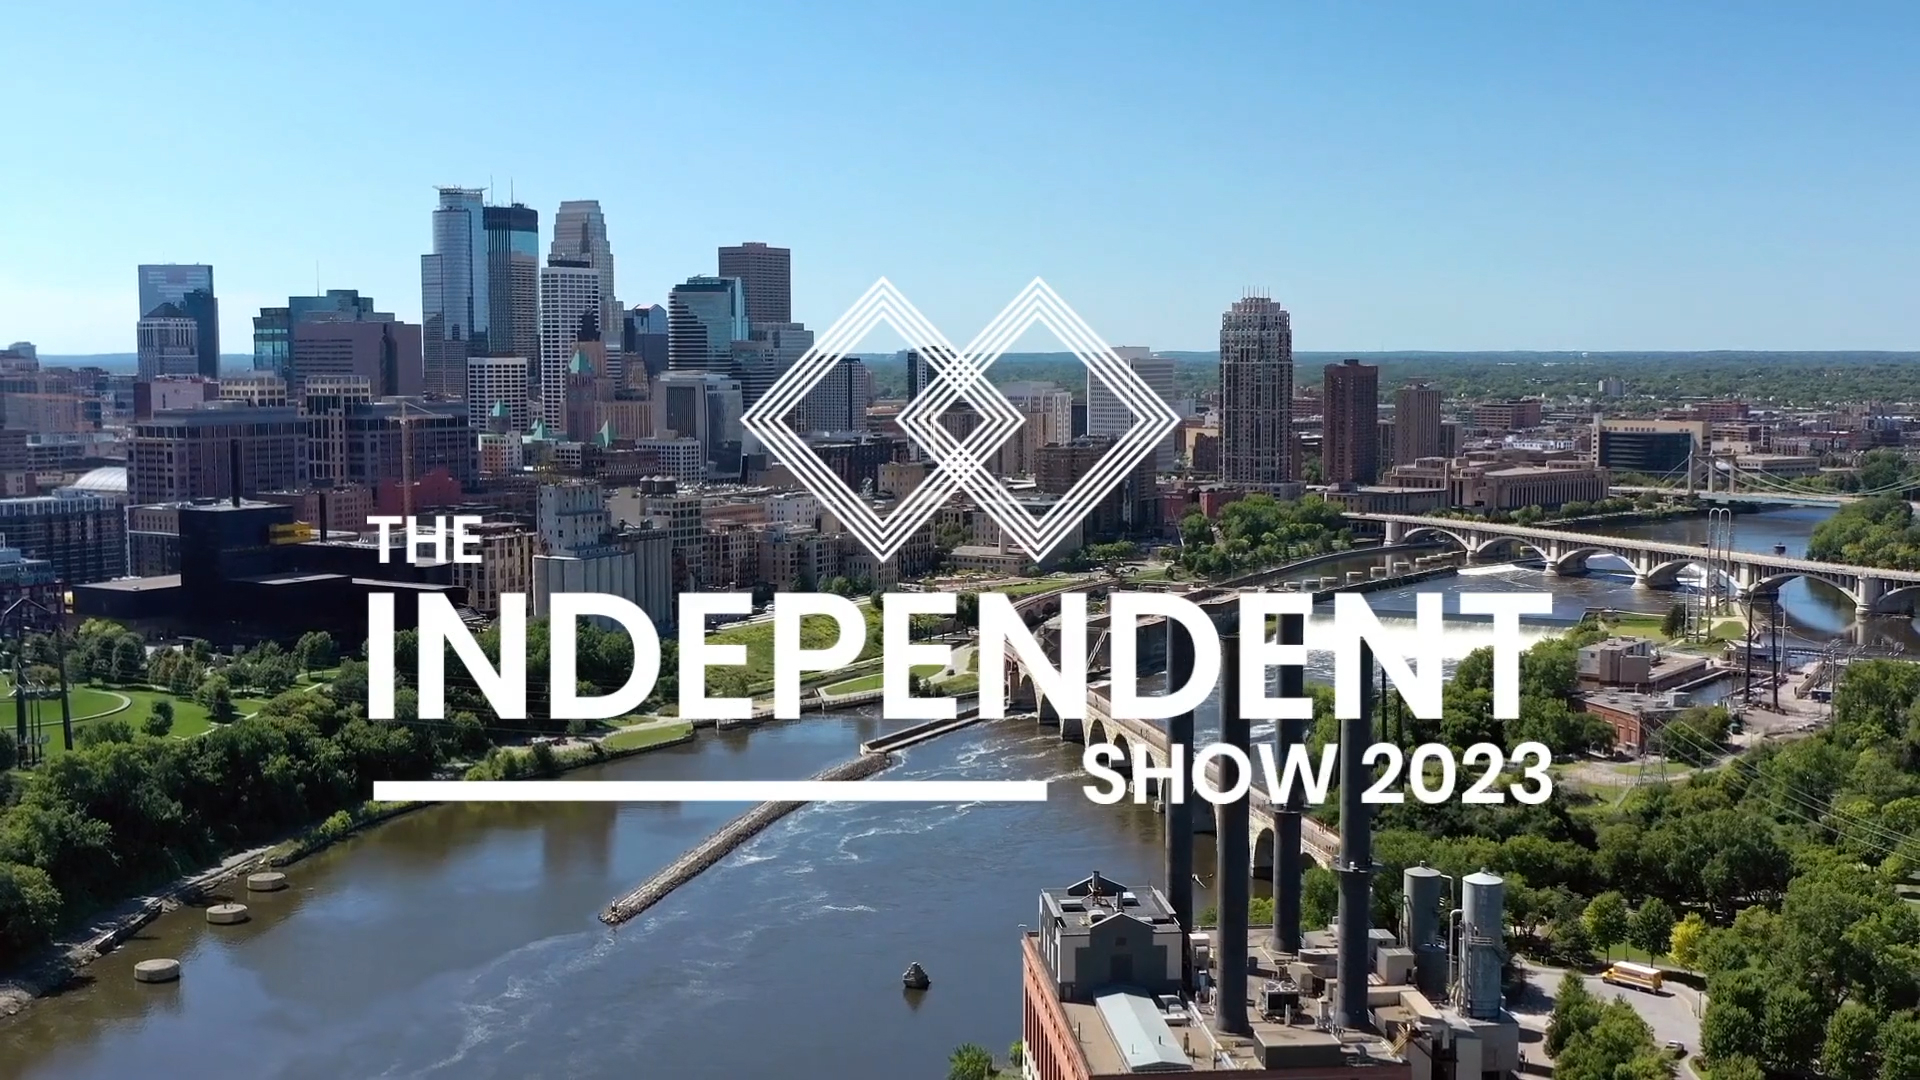 The Independent Show 2023 will bring more booths, exhibit hall hours, engaging speakers, sessions, policy talks, opportunities to network, and fun than ever.